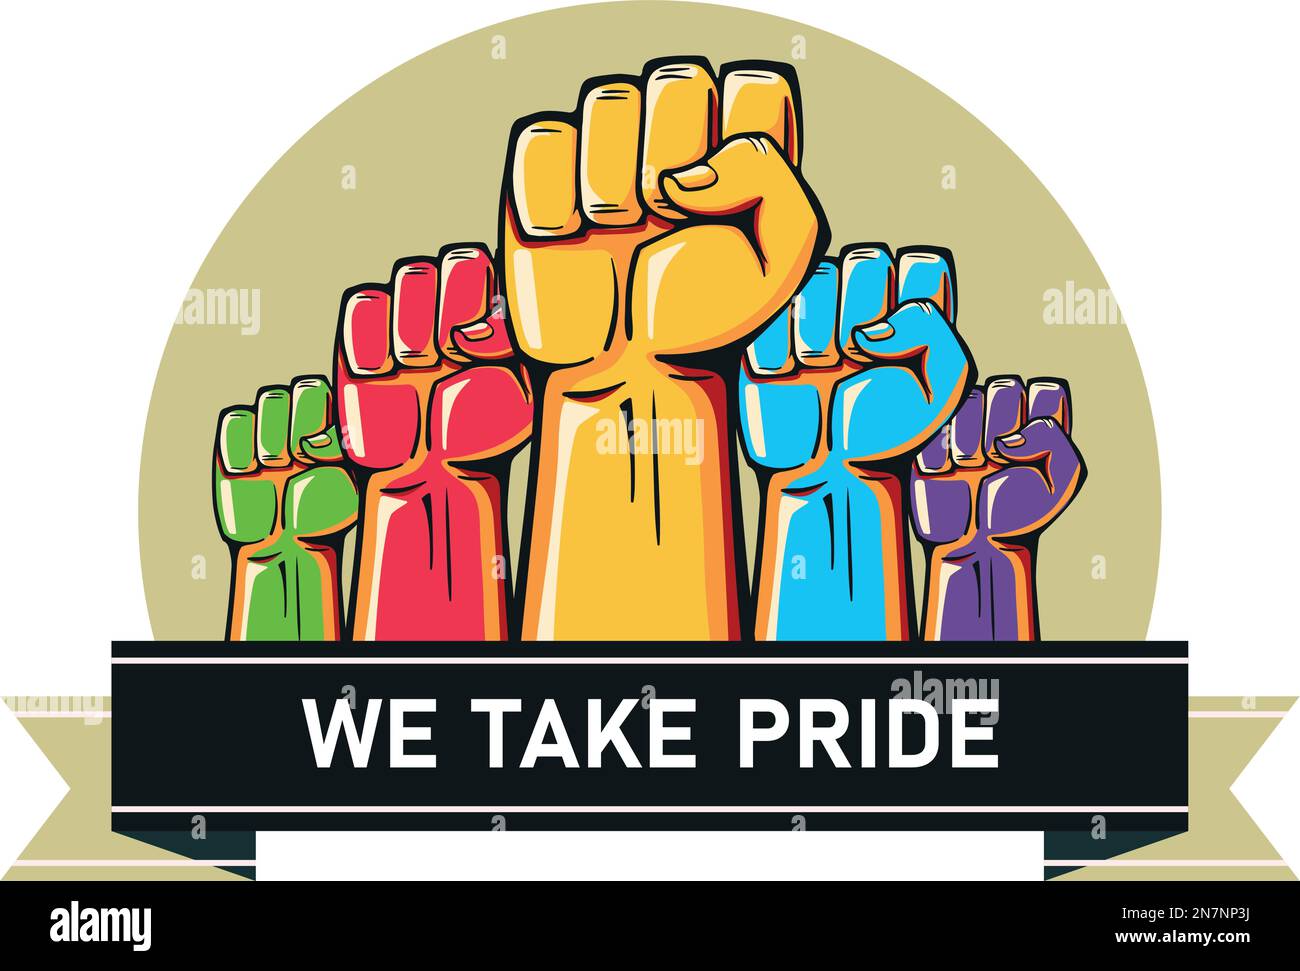 We take Pride, parade icon. Colorful Rainbow LGBTQ rights. Lesbians, gays, bisexuals, transgenders, queer. LGBTQ community flag. Stock Vector